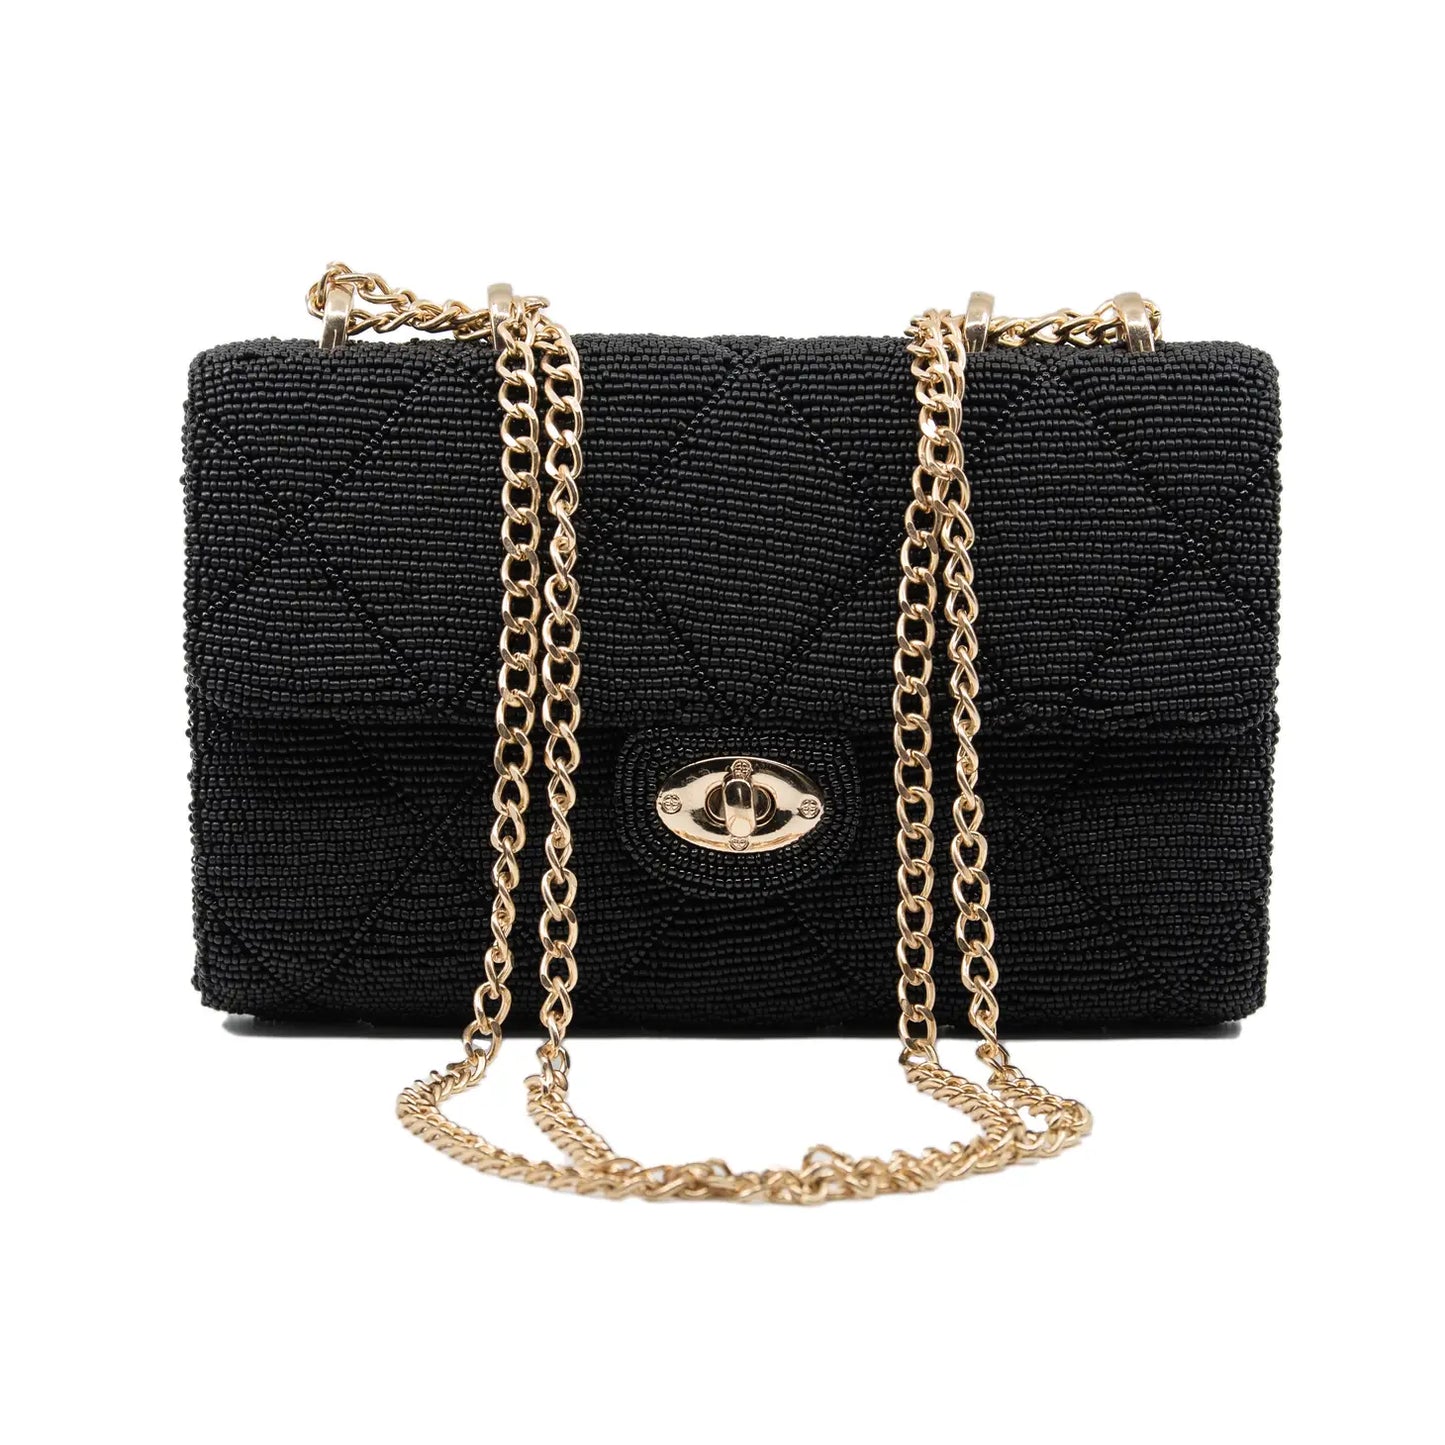 Raised Quilted Diamond Structured Chained Clutch